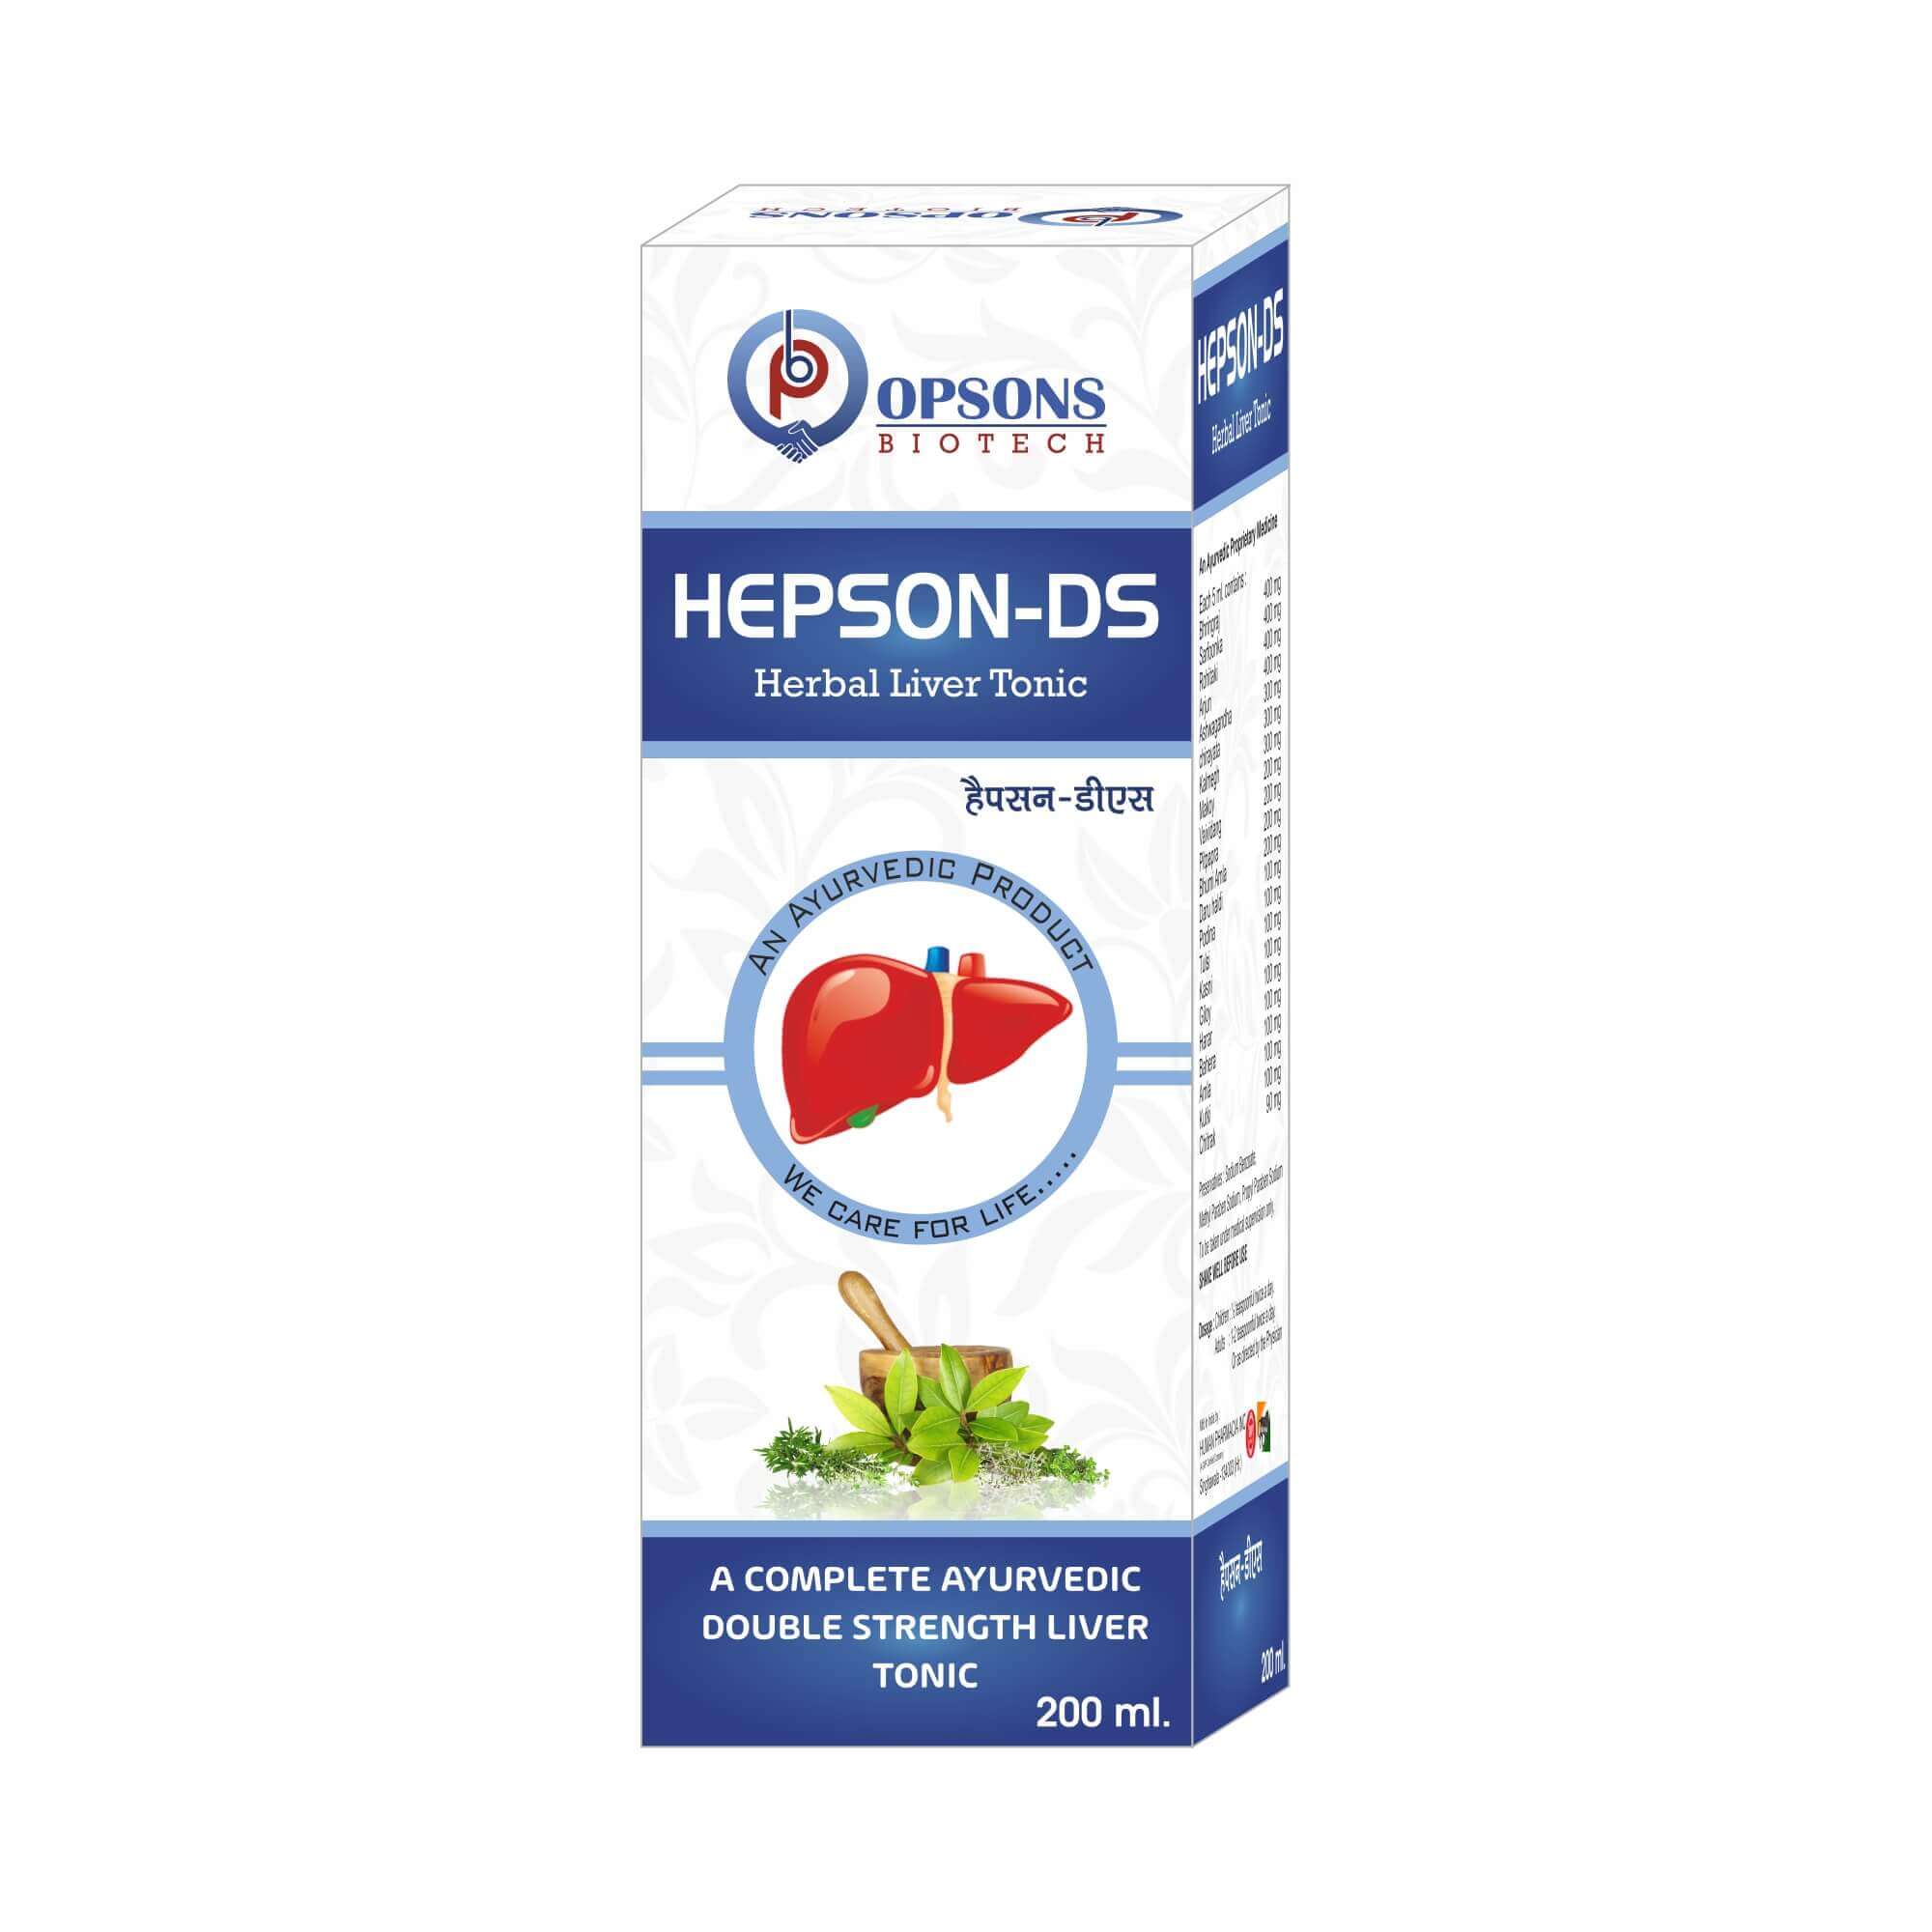 Product Name: Hepson DS, Compositions of Hepson DS are A Complete Ayurvedic Double Strength Liver Tonic - Opsons Biotech